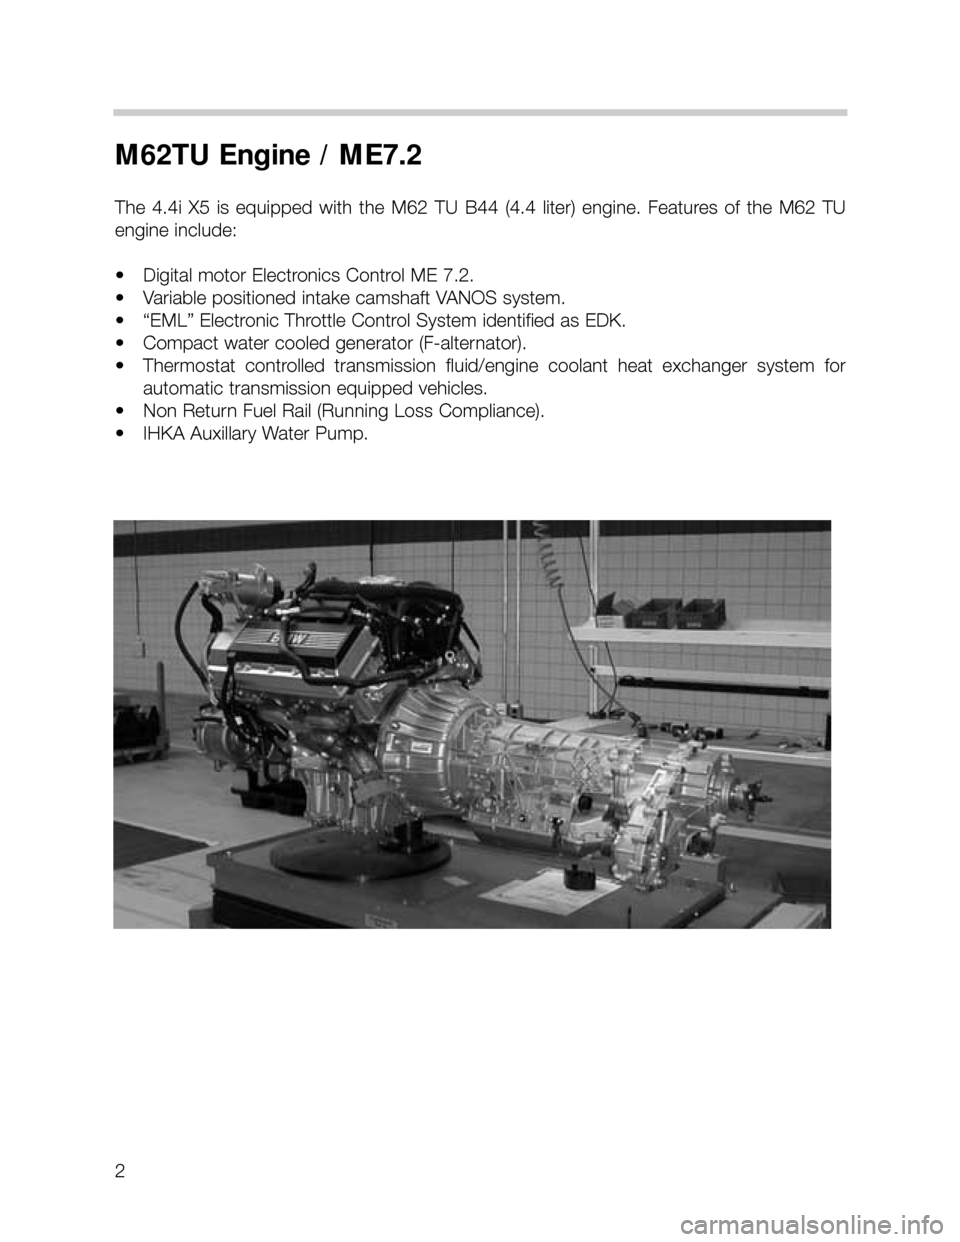 BMW X5 2001 E53 M62TU Engine Workshop Manual 2
M62TU Engine / ME7.2
The 4.4i X5 is equipped  with  the  M62  TU  B44  (4.4  liter)  engine.  Features  of  the  M62  TU
engine include:
• Digital motor Electronics Control ME 7.2.
• Variable po